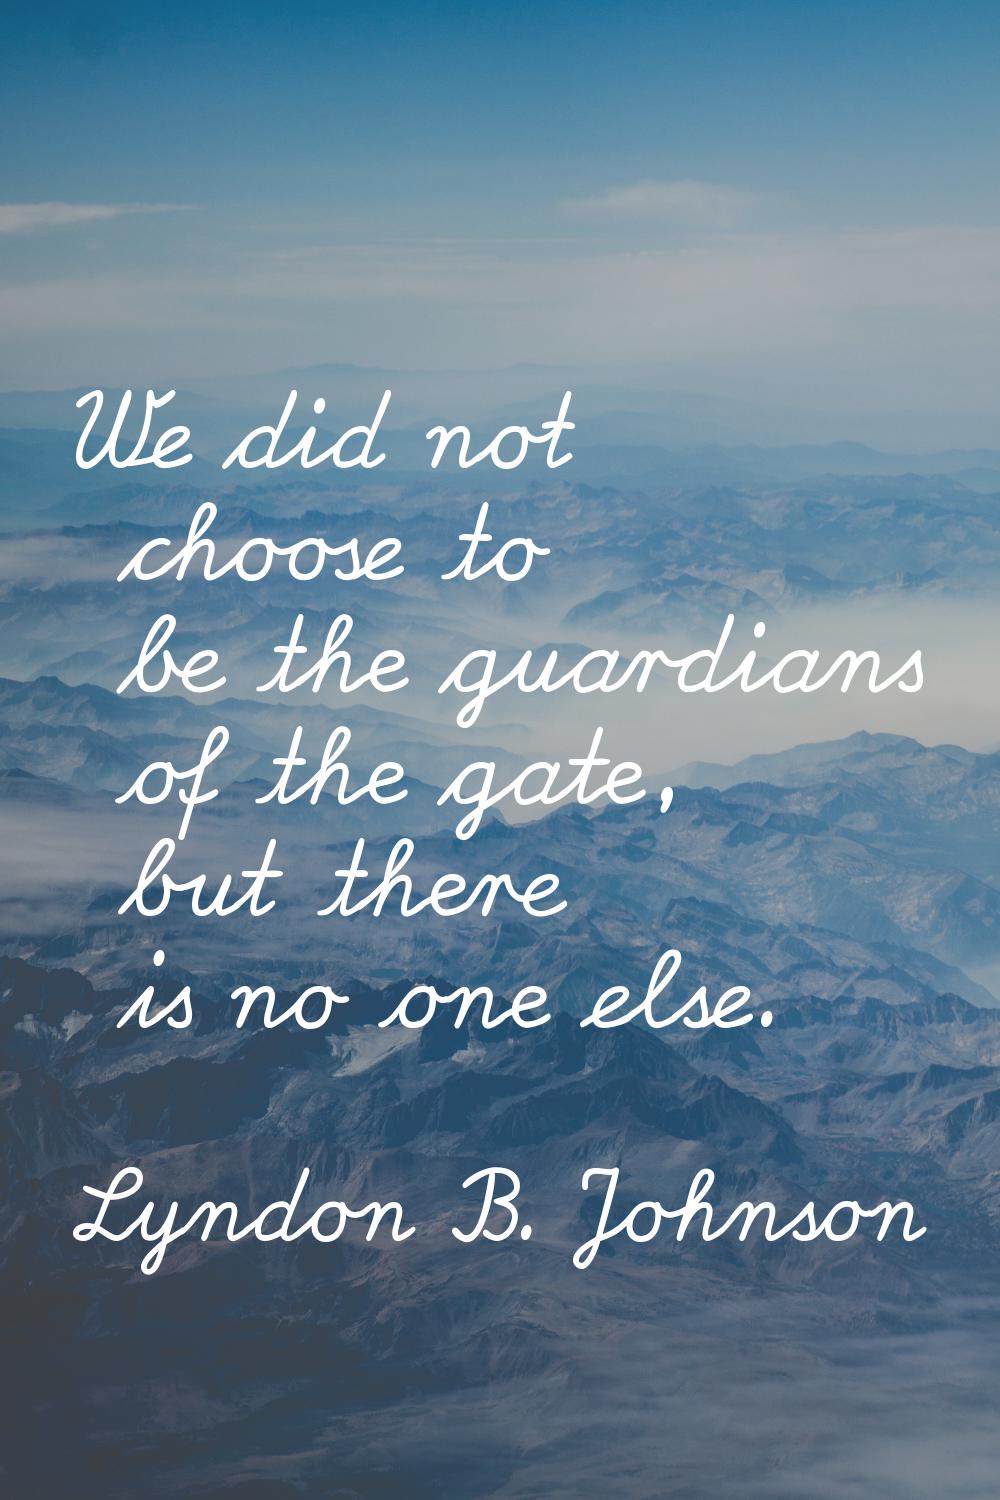 We did not choose to be the guardians of the gate, but there is no one else.